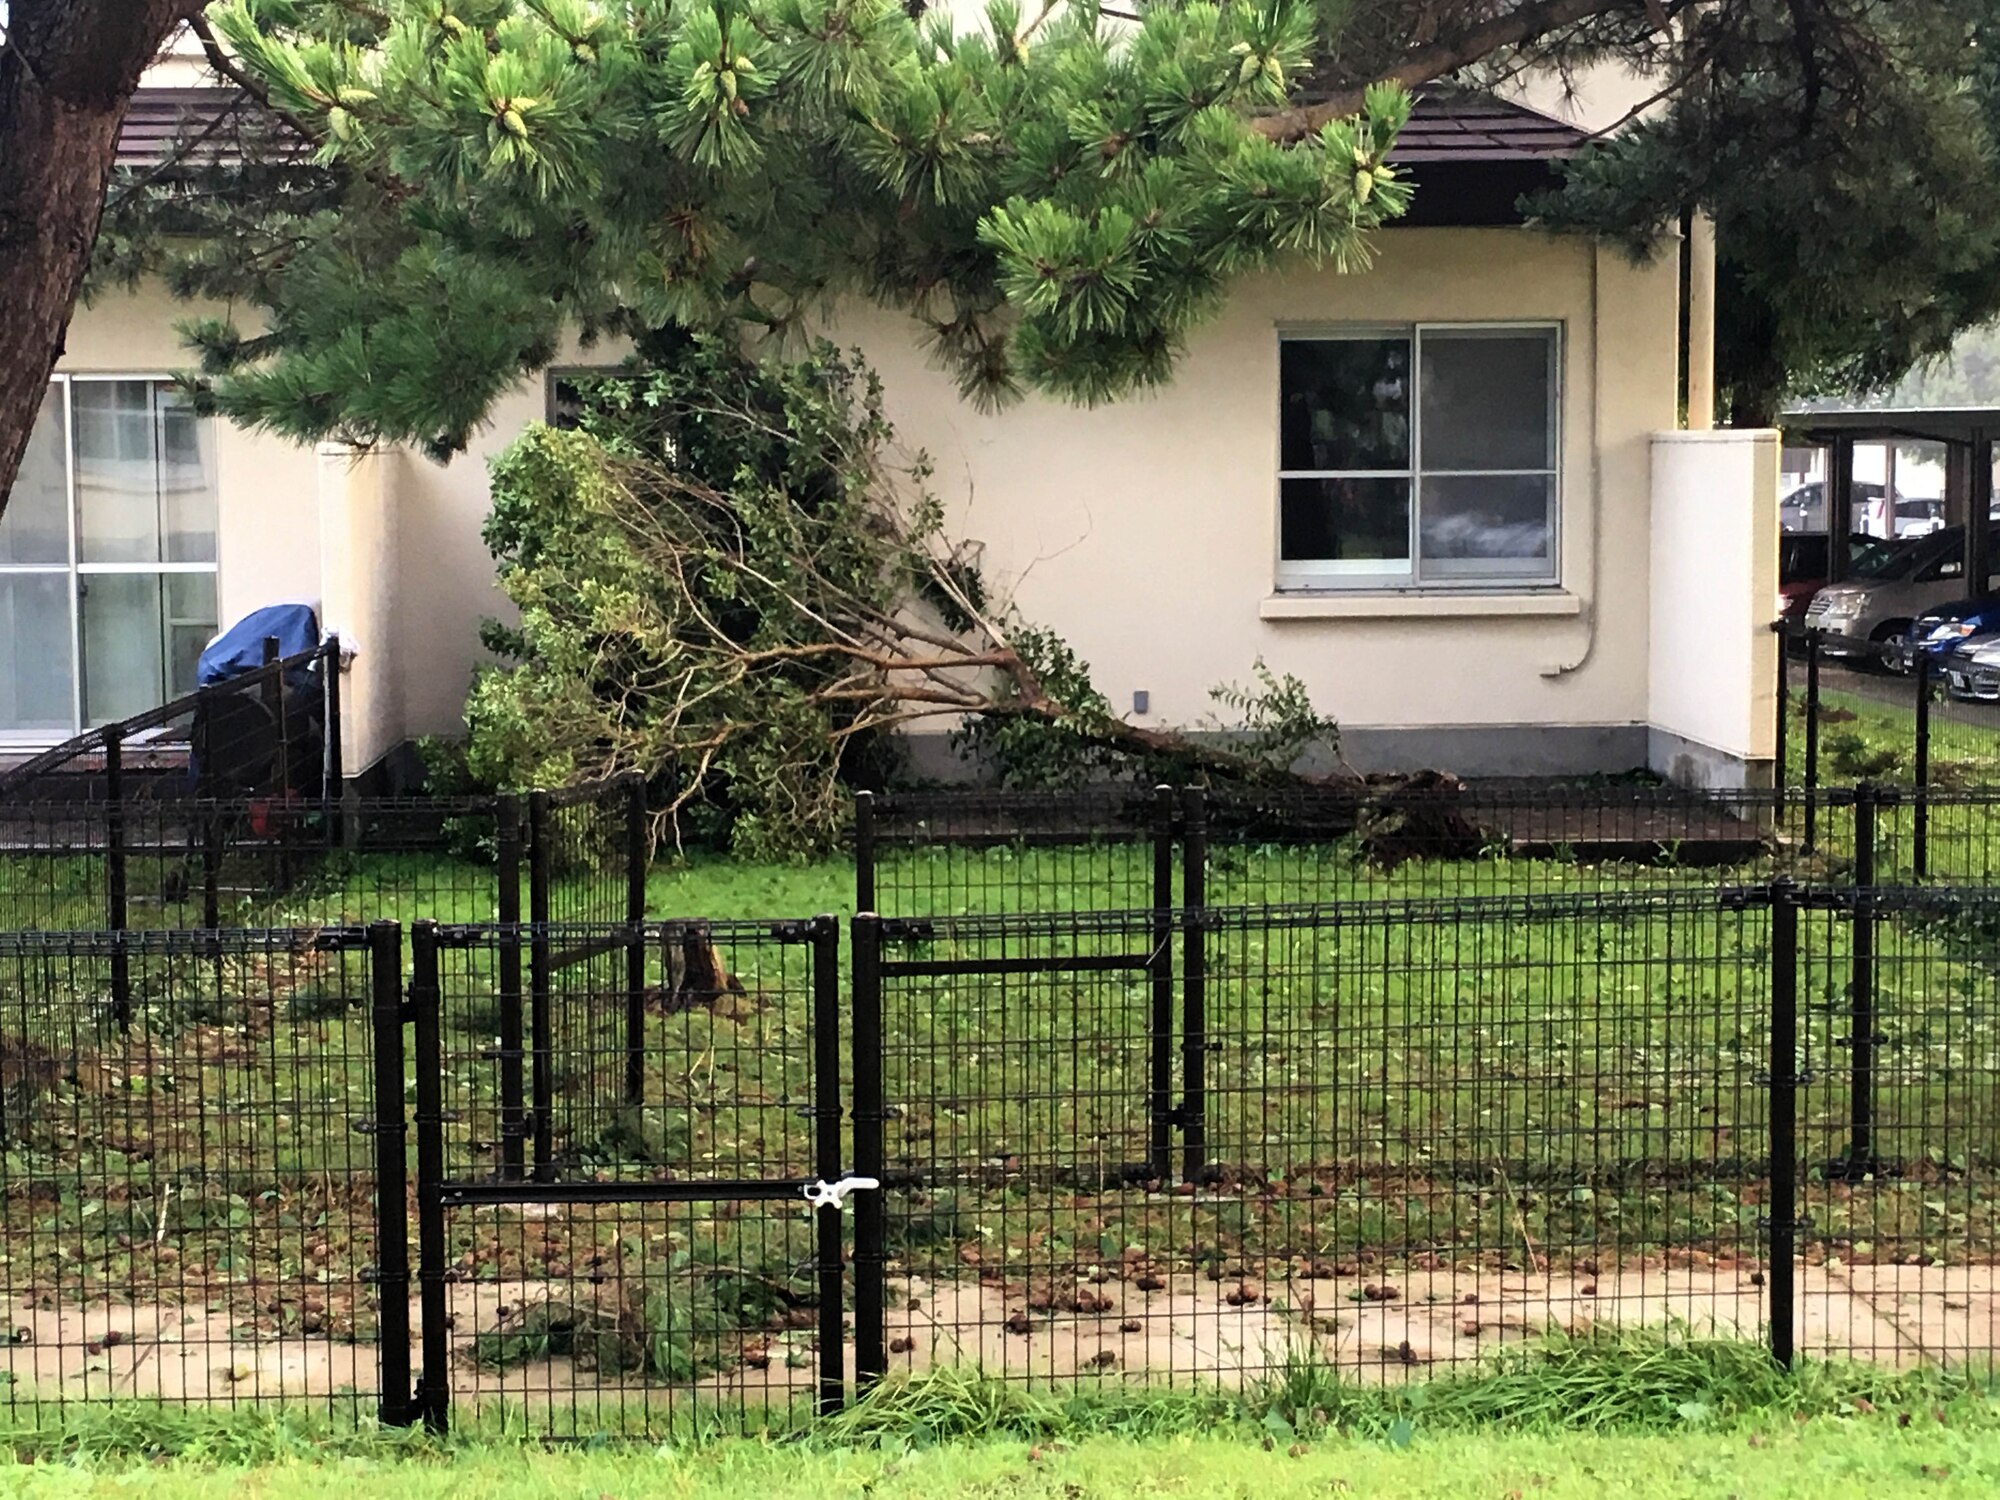 The streets around base housing are covered with broken branches and fallen debris at Misawa Air Base, Japan, Aug. 31, 2016. The 10-hour storm had destructive winds that reached up to 82 mph causing damage across the base. (U.S. Air Force photo by Tech. Sgt. April Quintanilla)